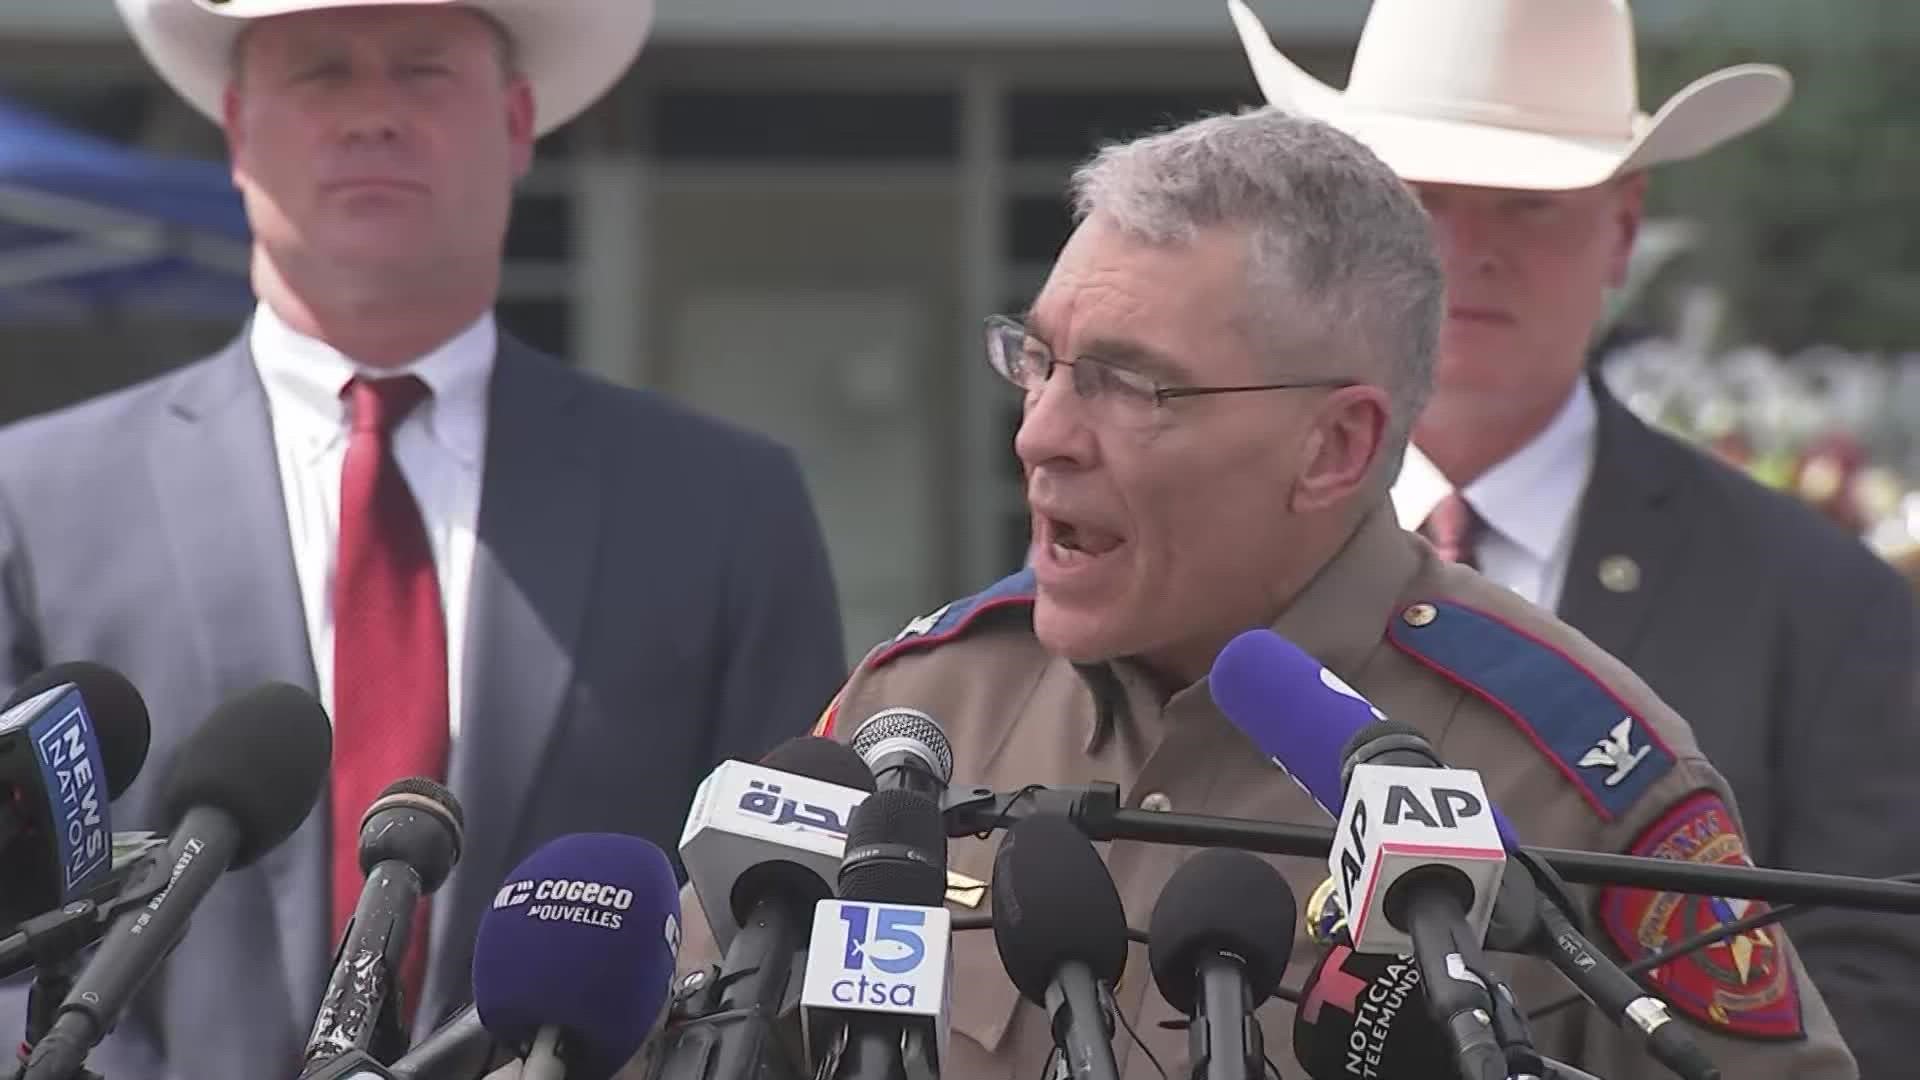 Steven C. McCraw, director of Texas DPS, answers questions at a press conference about Uvalde school shooting and why officers did not breach the school.